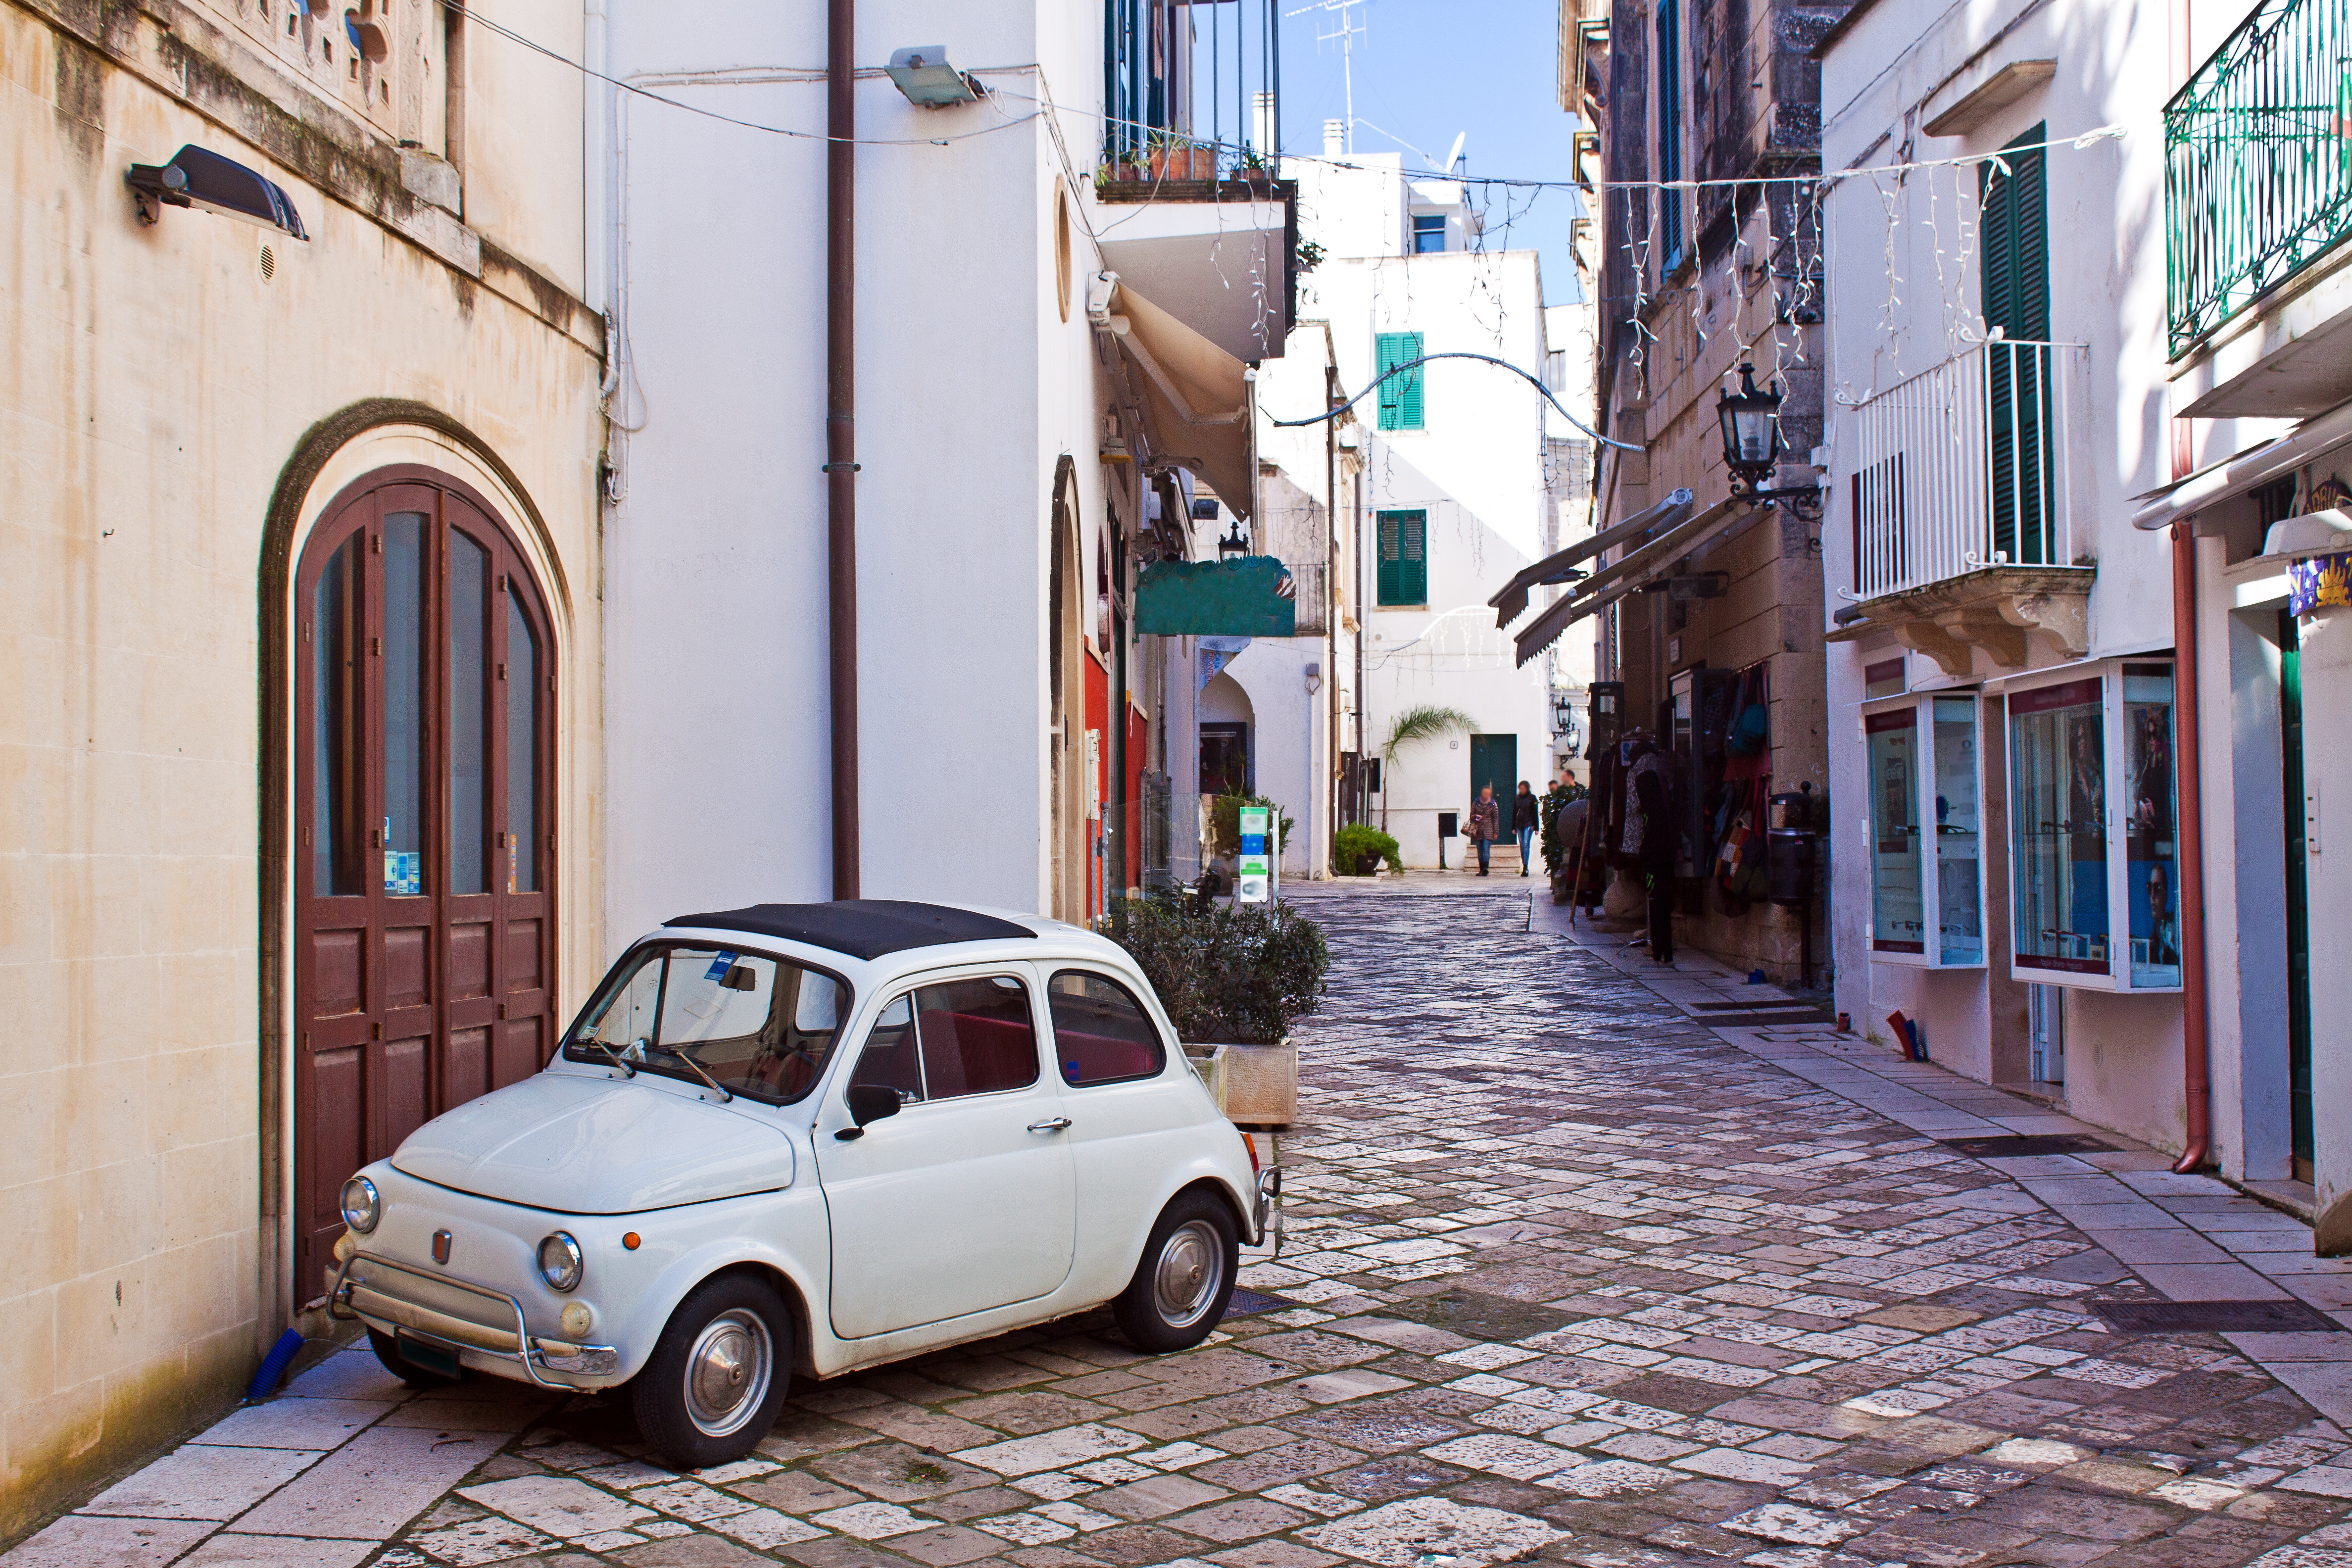 Rental Car Tips While Abroad in Italy